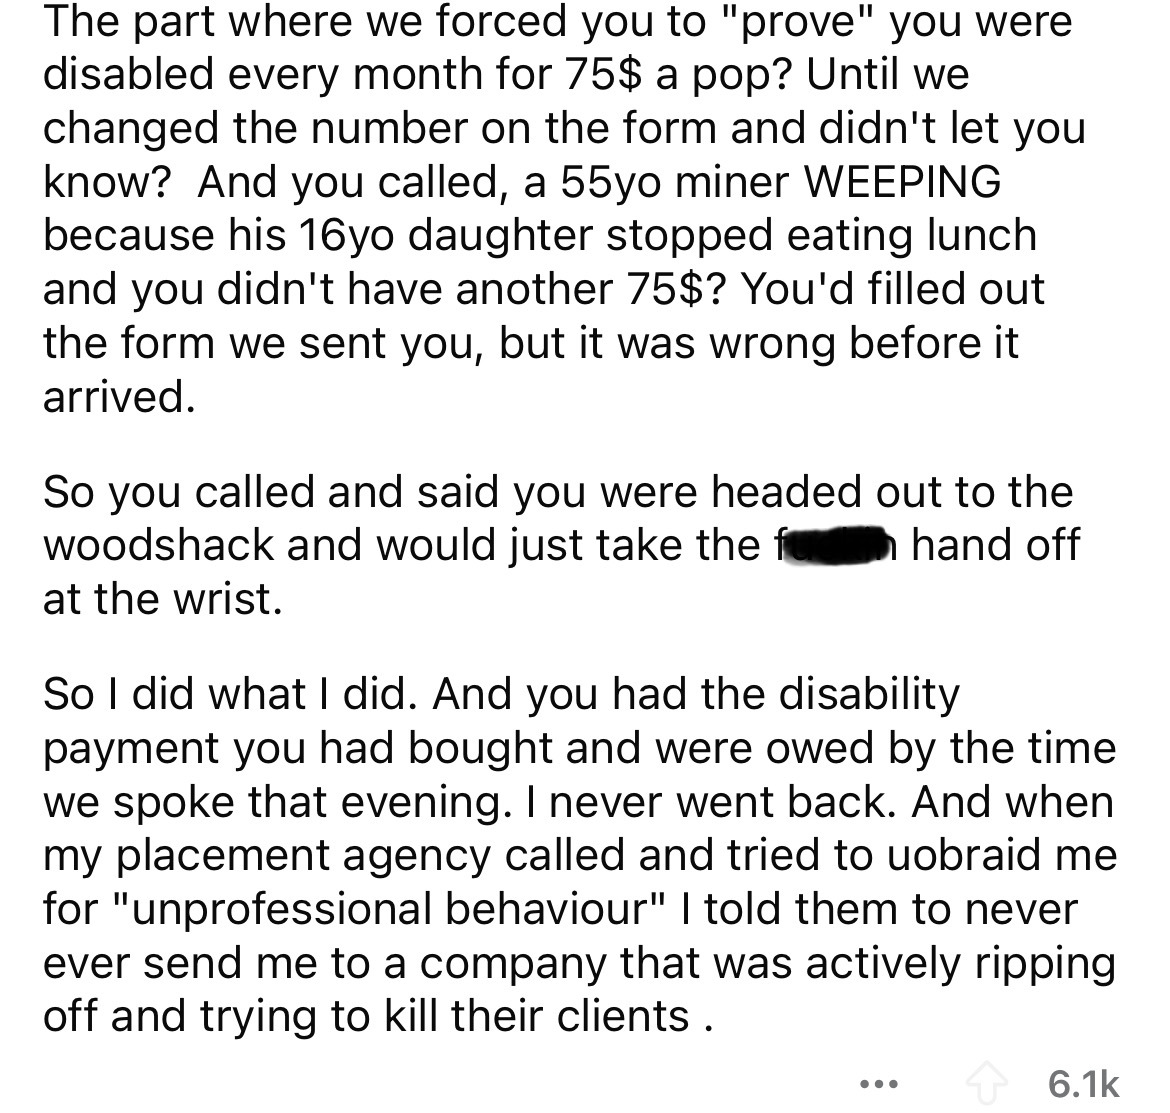 number - The part where we forced you to "prove" you were disabled every month for 75$ a pop? Until we changed the number on the form and didn't let you know? And you called, a 55yo miner Weeping because his 16yo daughter stopped eating lunch and you didn